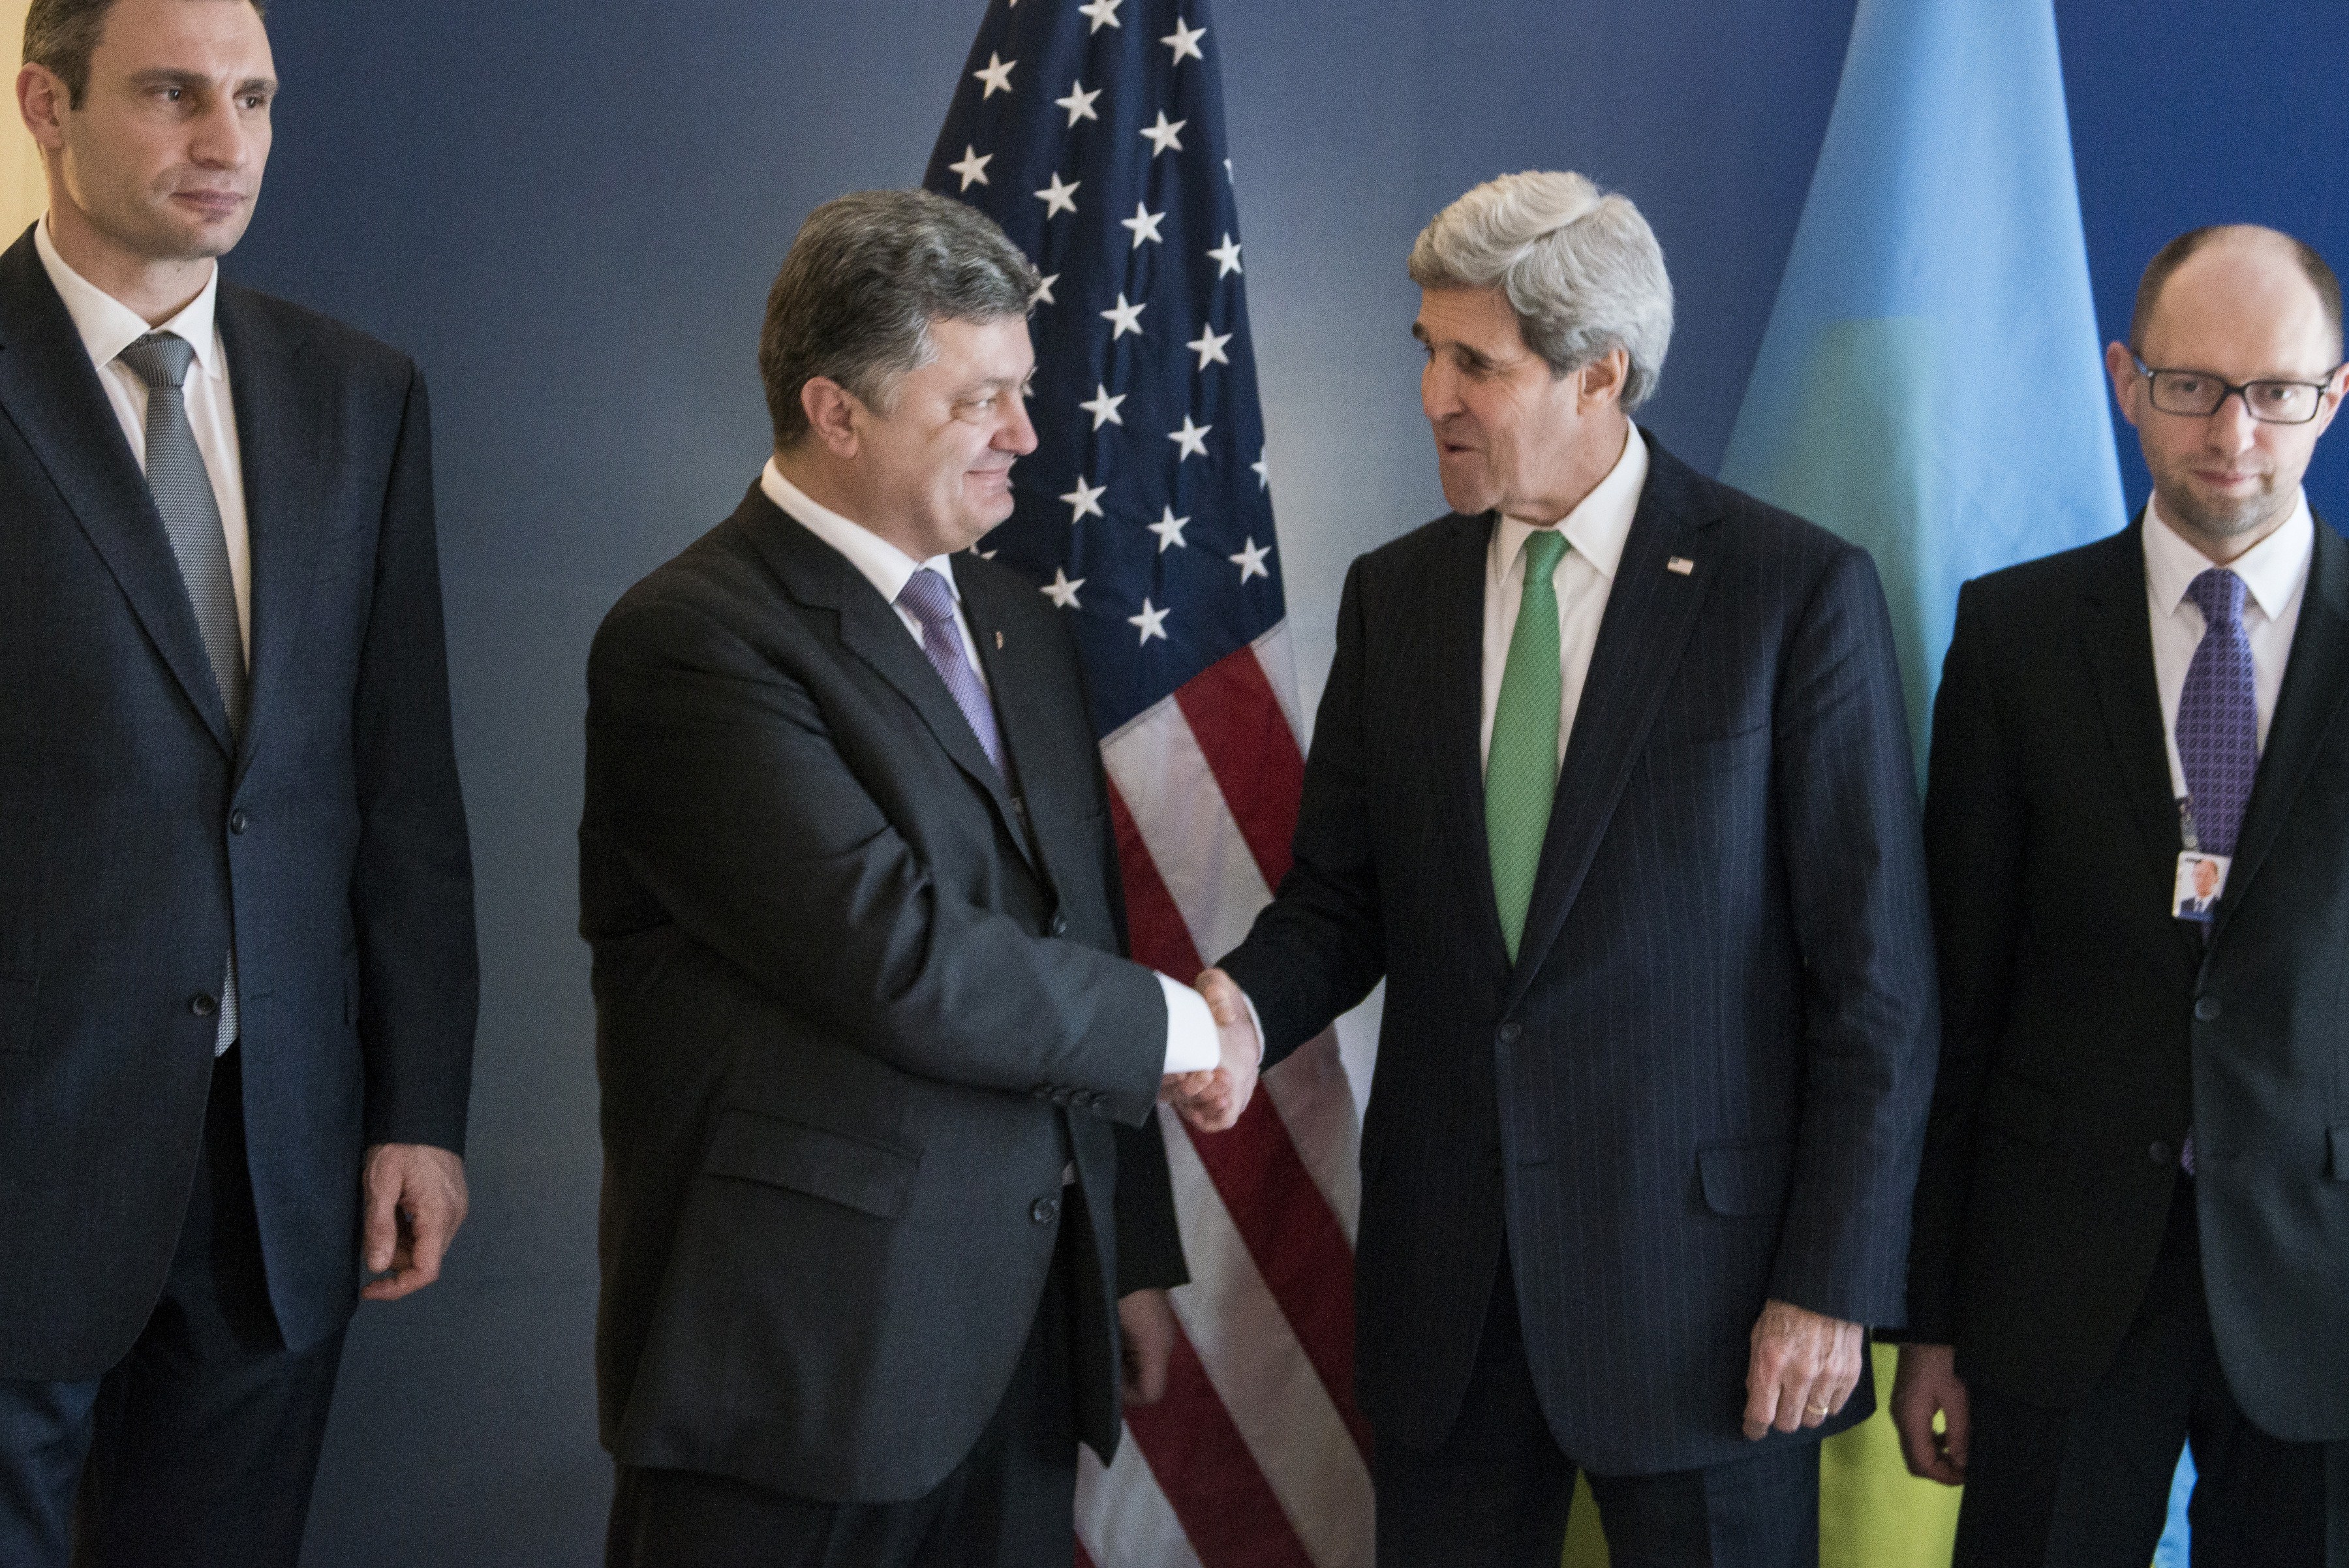 From Left: Vitali Klitschko, the head of the Ukrainian UDAR (Punch) party, Ukrainian businessman and politician Petro Poroshenko, U.S. Secretary of State John Kerry and Ukrainian opposition leader Arseniy Yatsenyuk prior to a meeting during the Munich Security Conference at the Bayerischer Hof Hotel in Munich, on Feb. 1, 2014.